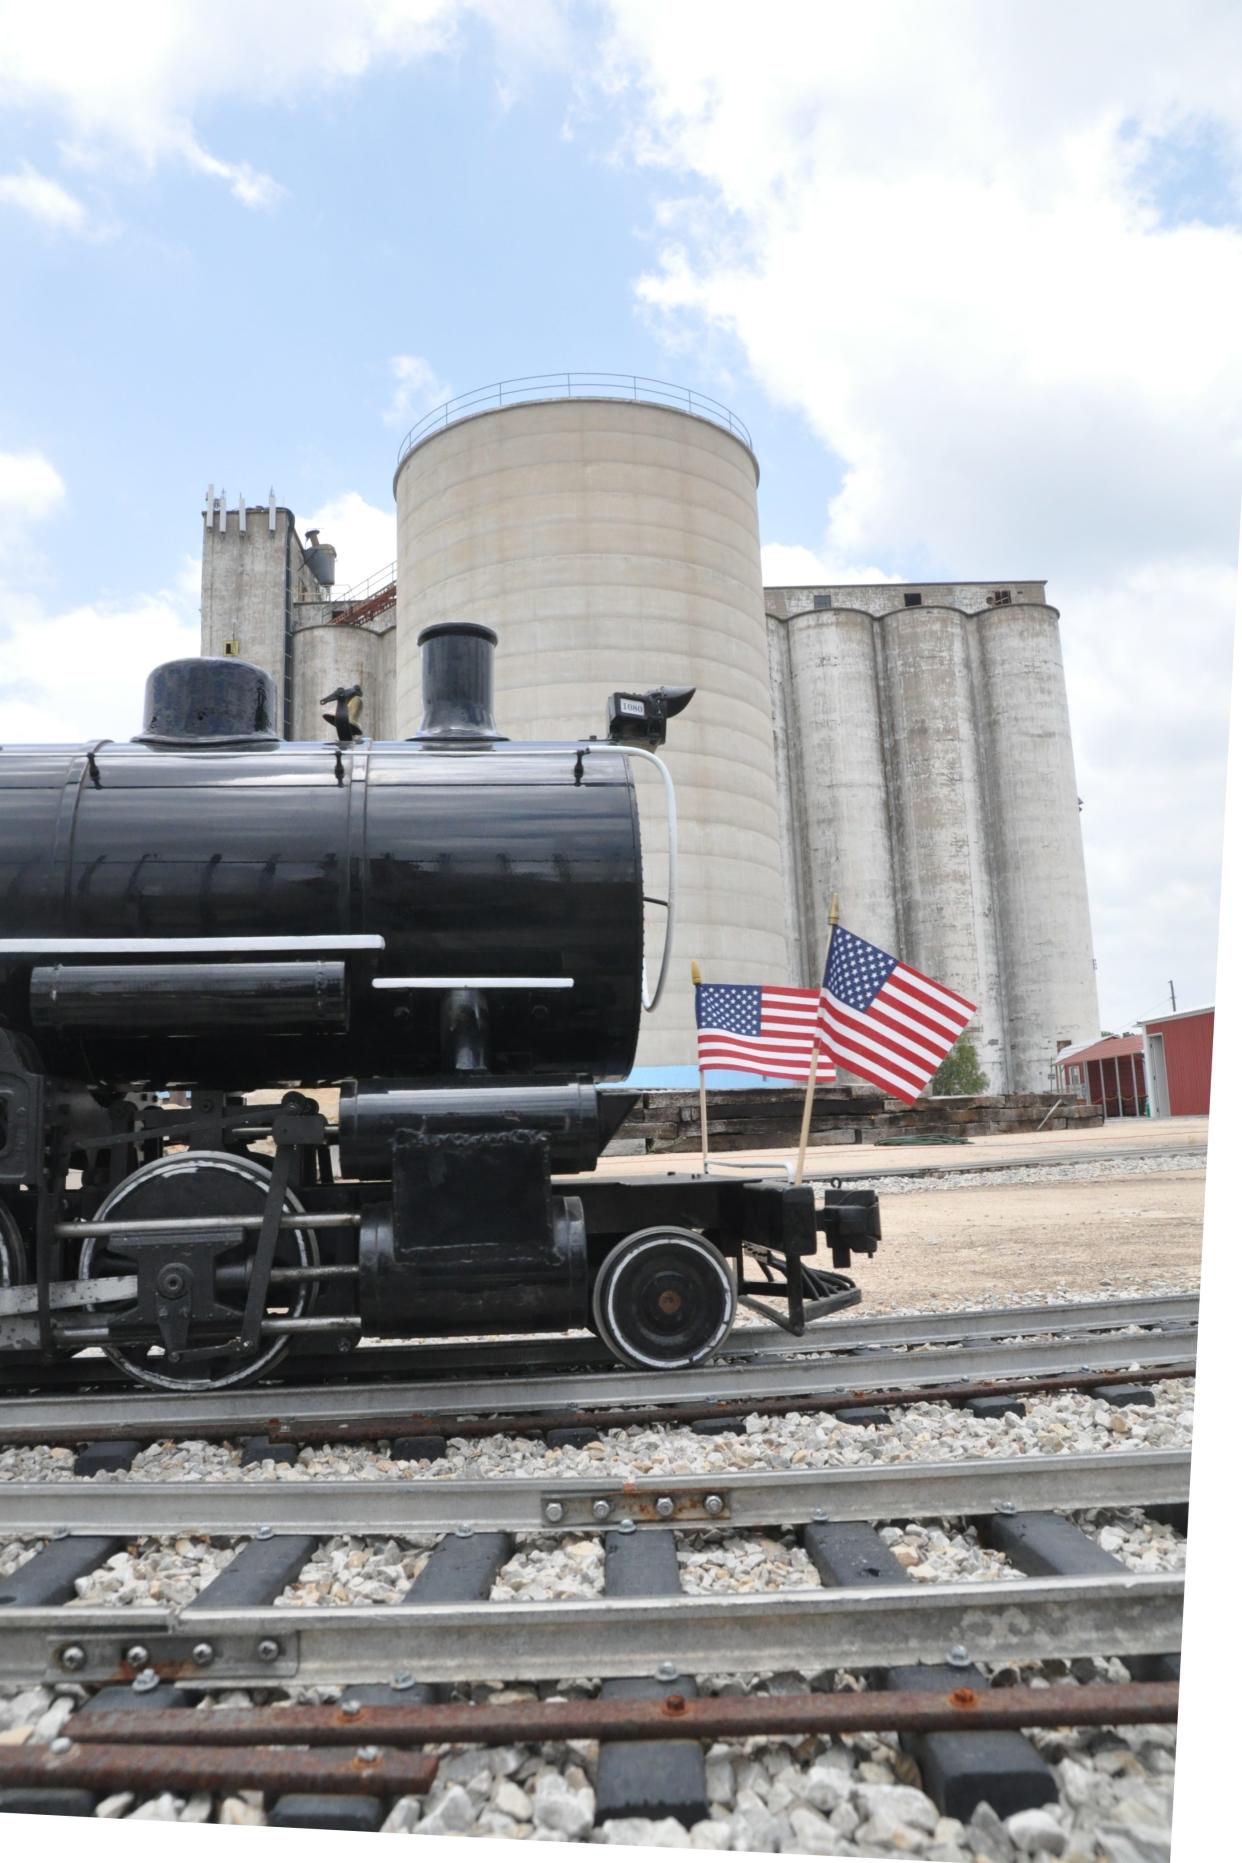 This mini-train locomotive at the Lehnis Railroad Museum travels past silos. The museum is across the road from the renovated Santa Fe Railroad Depot, which includes a small museum dedicated to Harvey Girls, who ran restaurants and inns along western rail lines.